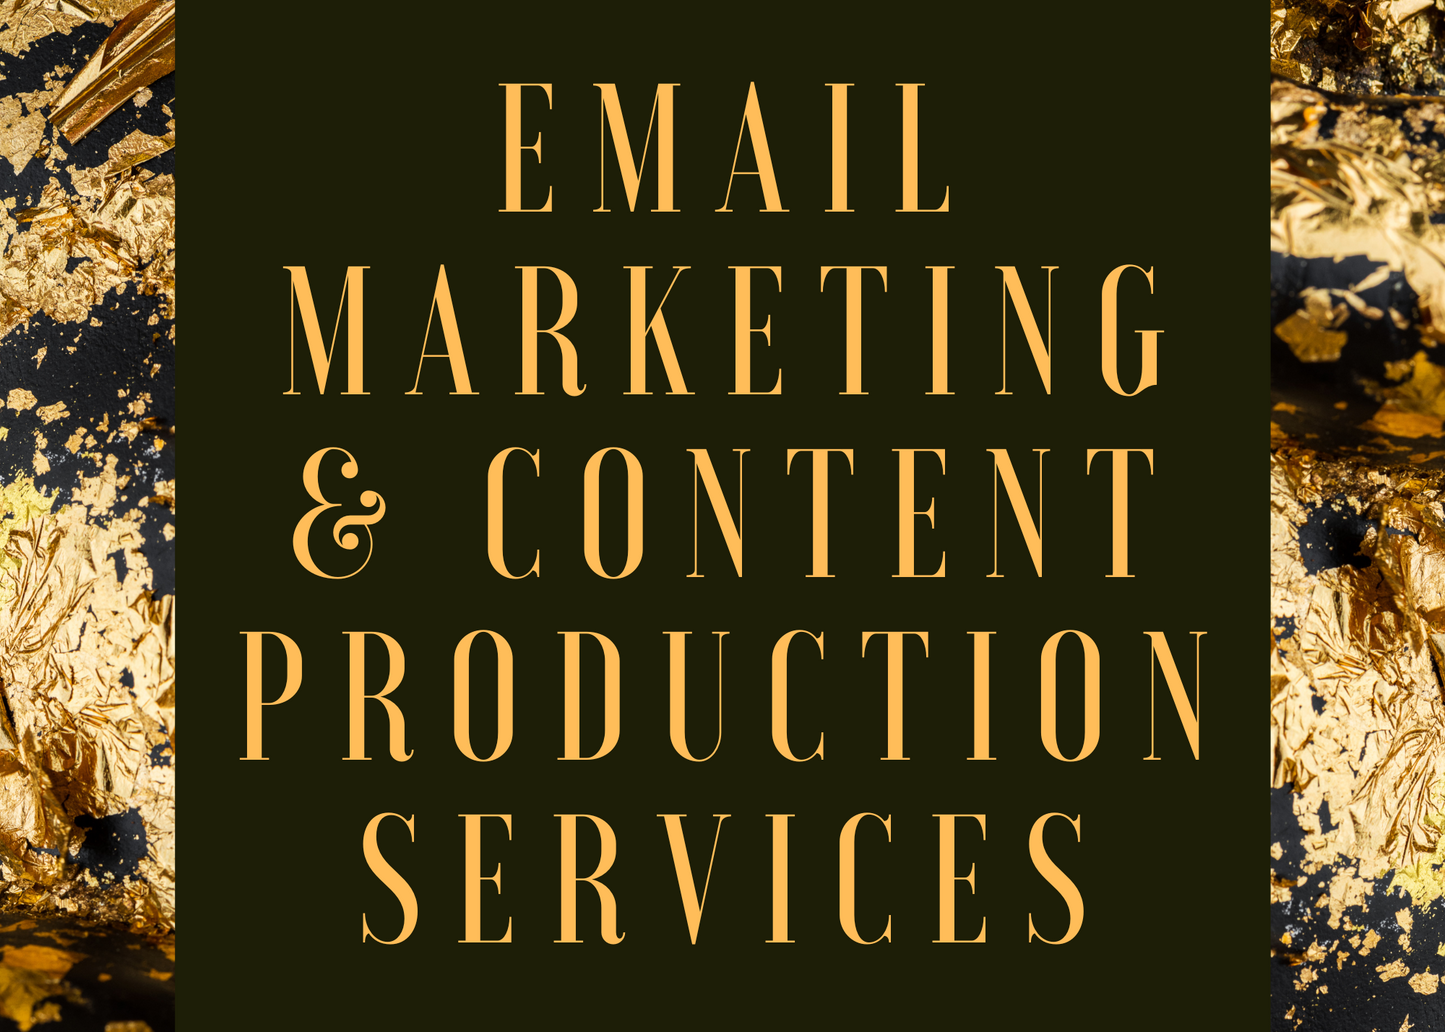 Email Marketing & Content Production Services